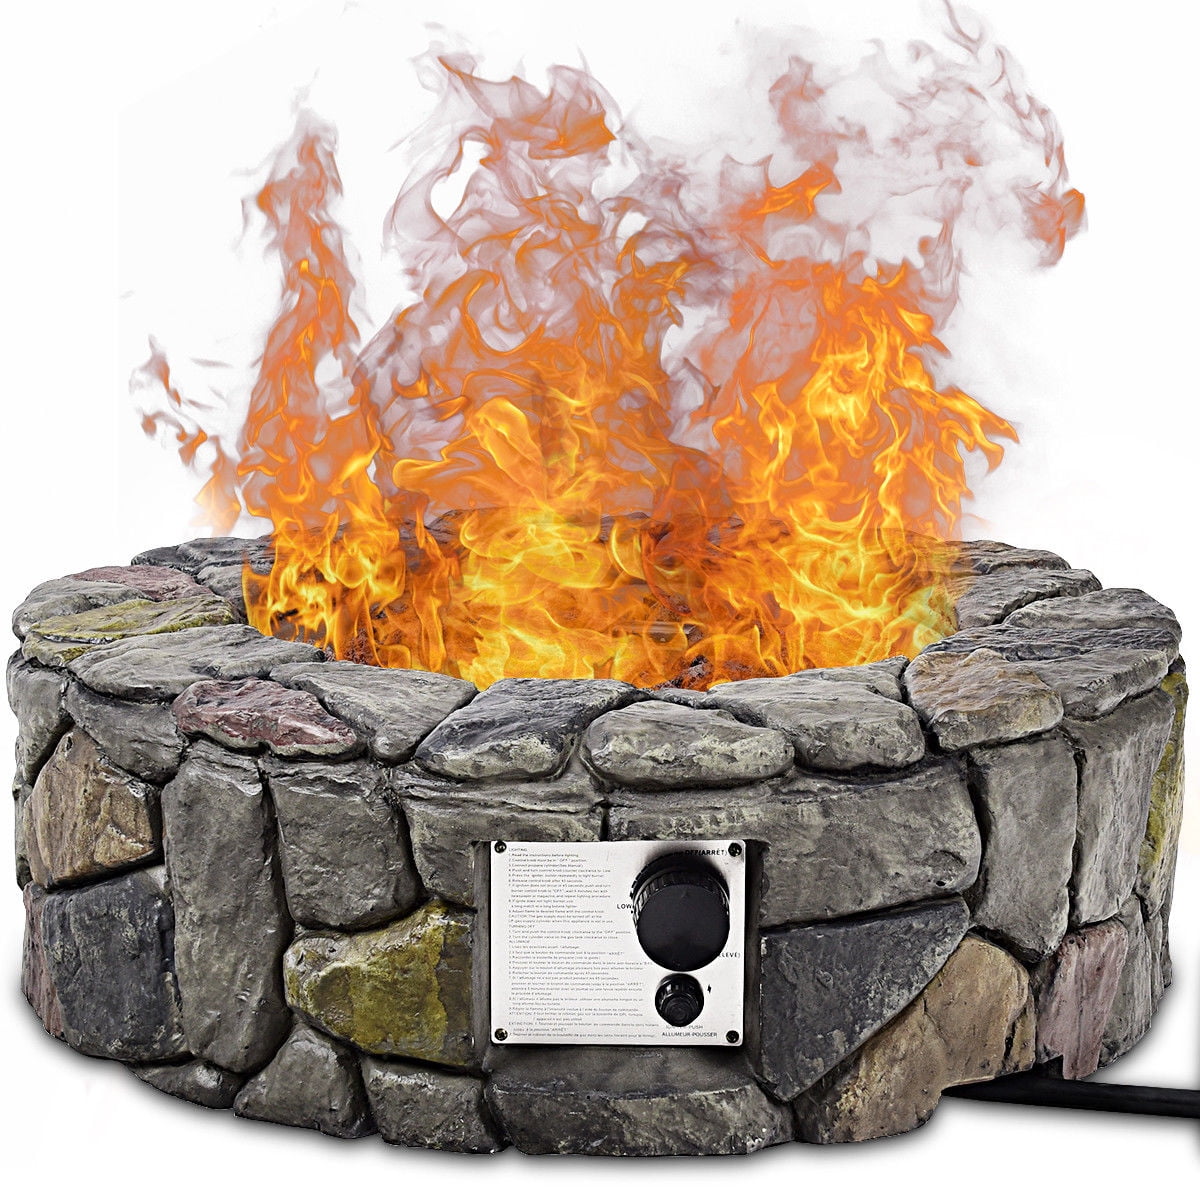 This is our new stone gas fire pit intended for outdoor use, which is a gre...